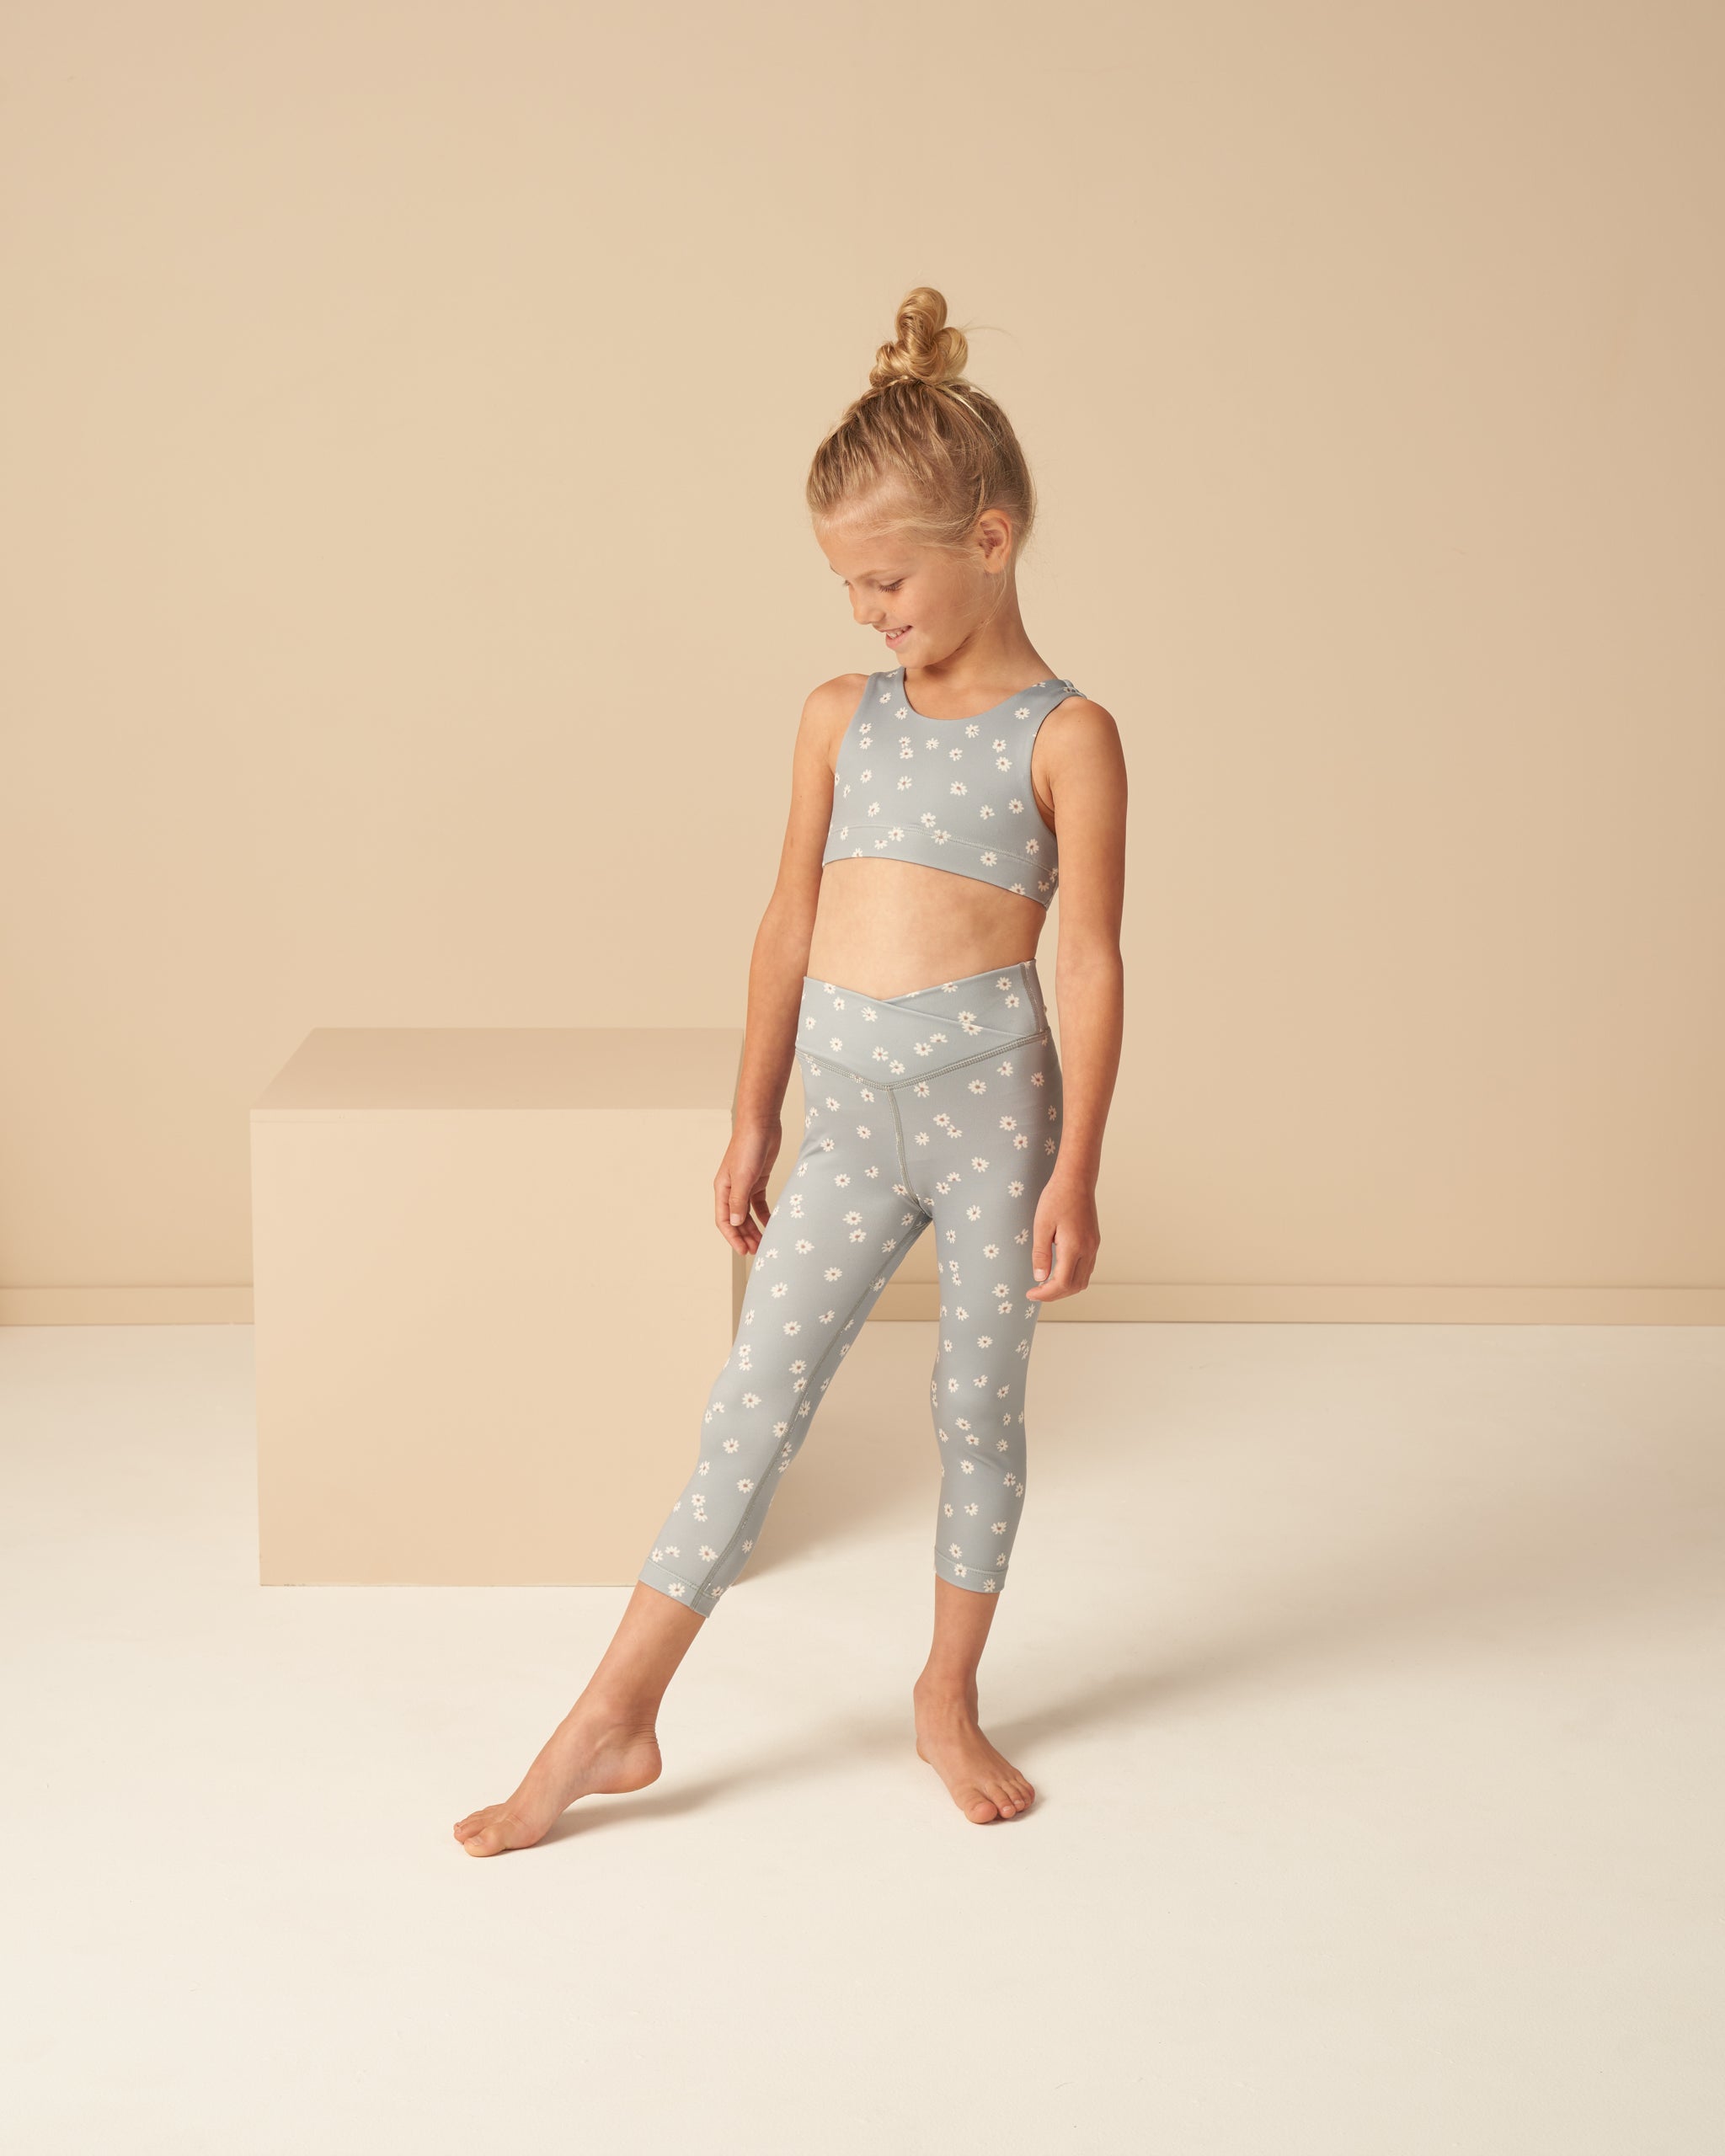 Criss Cross Legging || Blue Daisy - Rylee + Cru | Kids Clothes | Trendy Baby Clothes | Modern Infant Outfits |